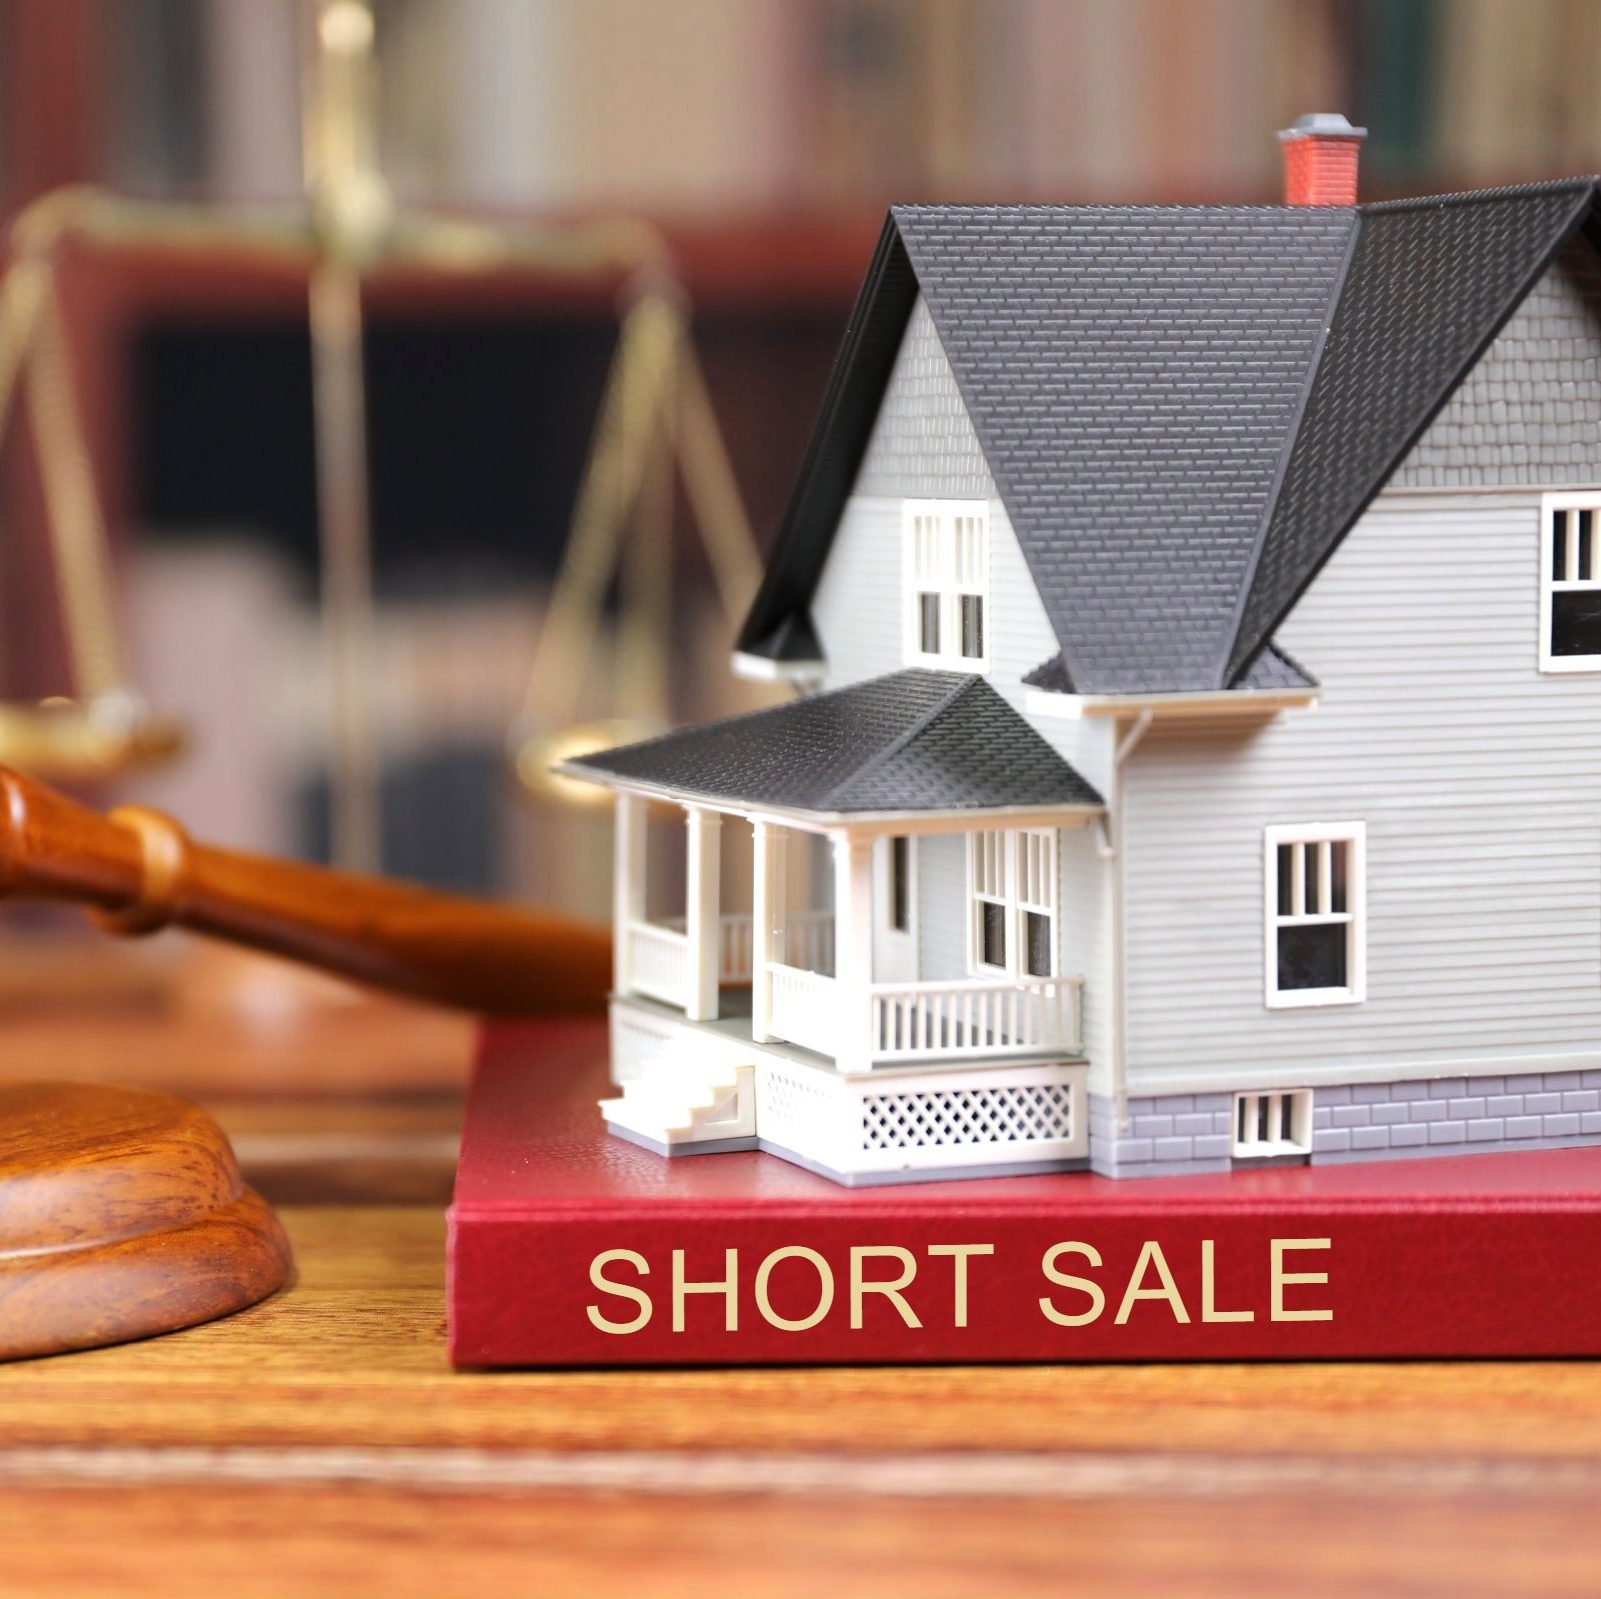 All About Real estate Short Sale, Top 5 Tips for Short Sale